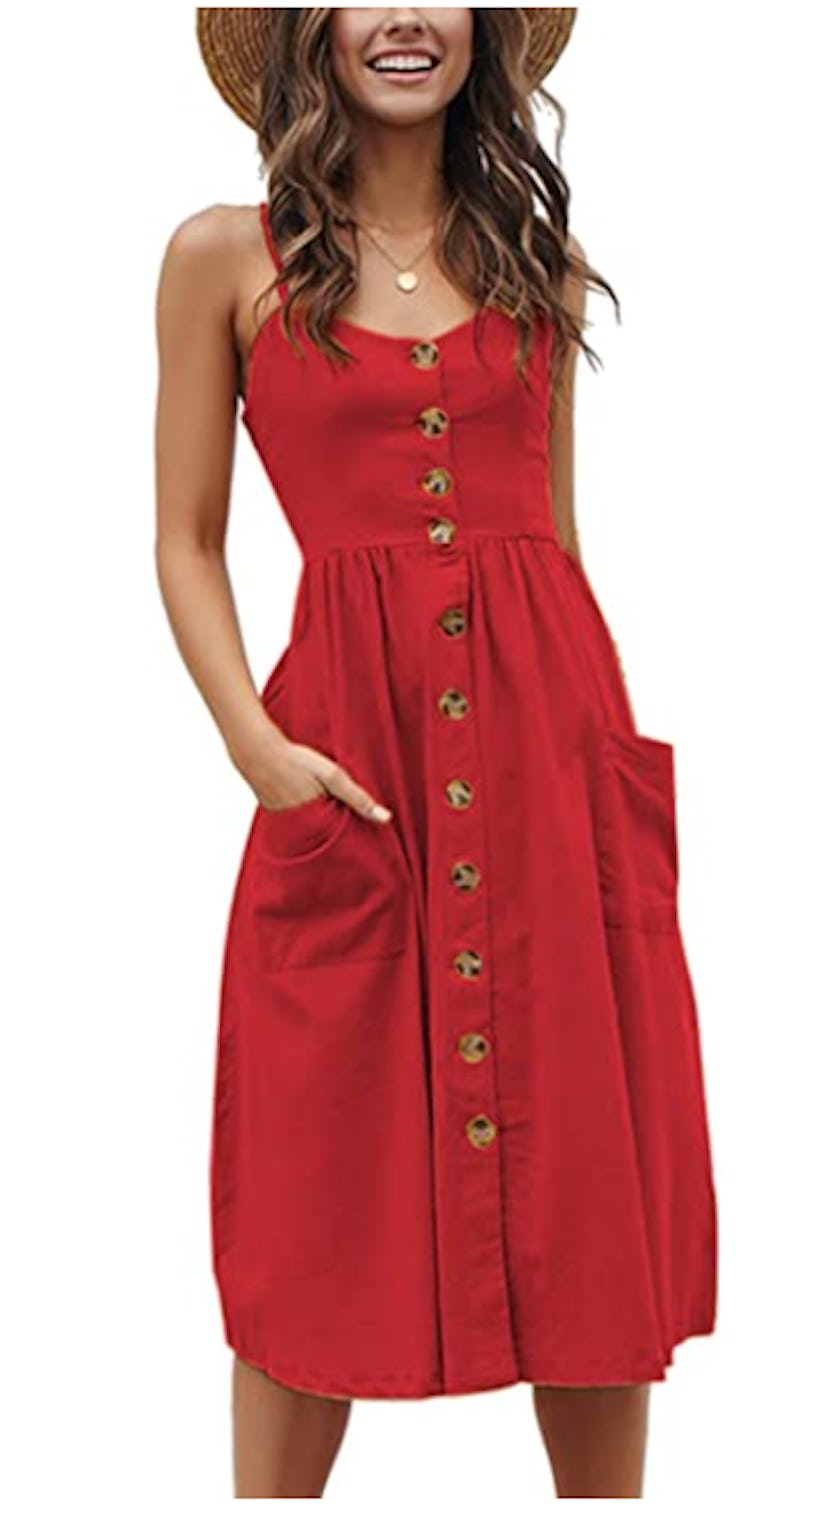 A spaghetti strap button-down midi dress will keep you cool and on-trend during the summer.